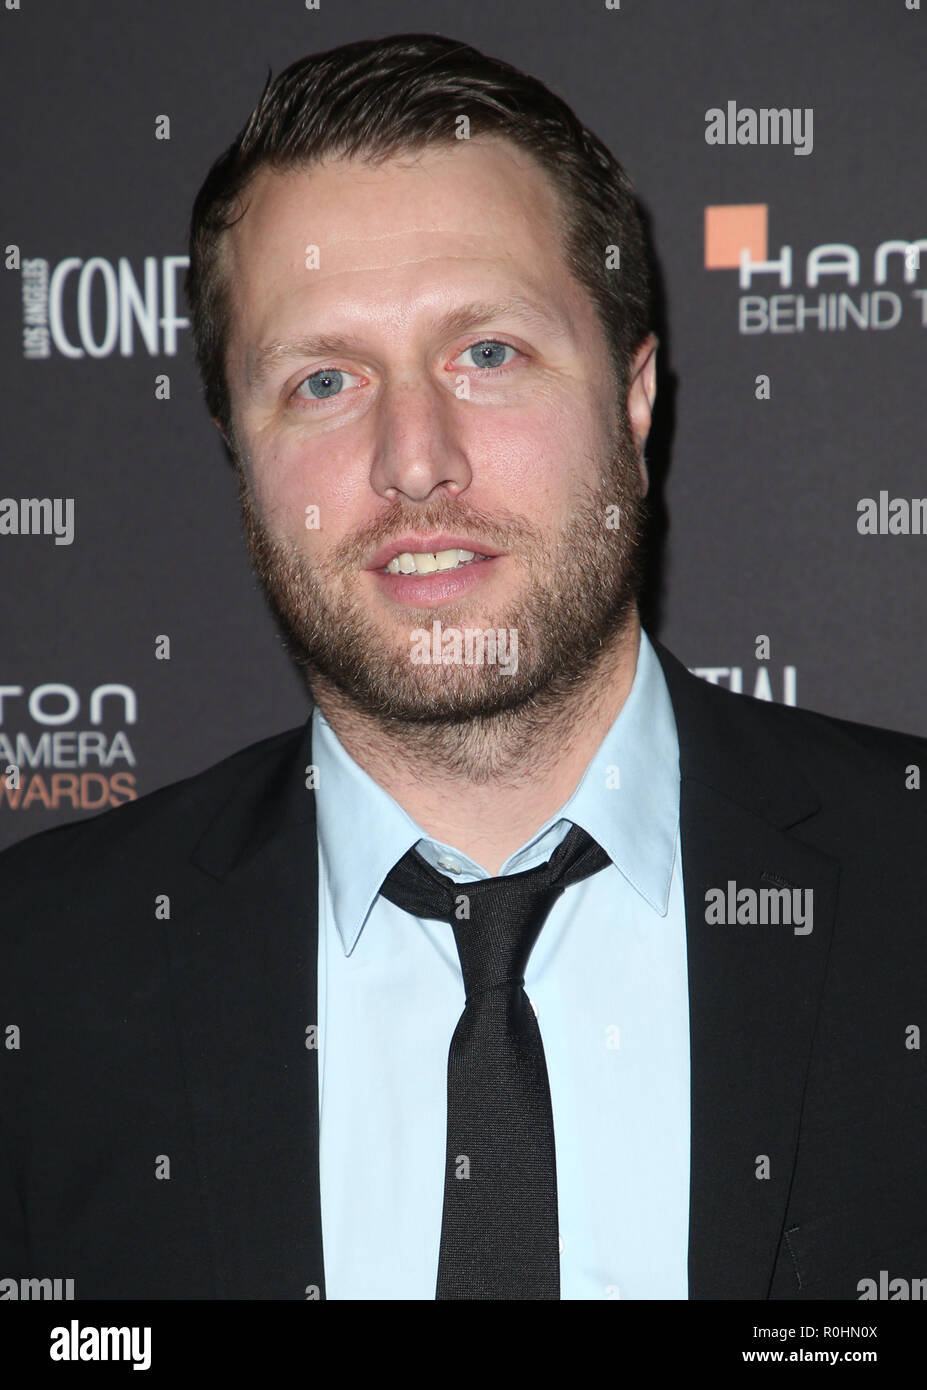 LOS ANGELES, CA - NOVEMBER 4: Matthew Heineman at the 10th Hamilton Behind the Camera Awards hosted by Los Angeles Confidential at Exchange LA in Los Angeles, California on November 4, 2018. Credit: Faye Sadou/MediaPunch Stock Photo